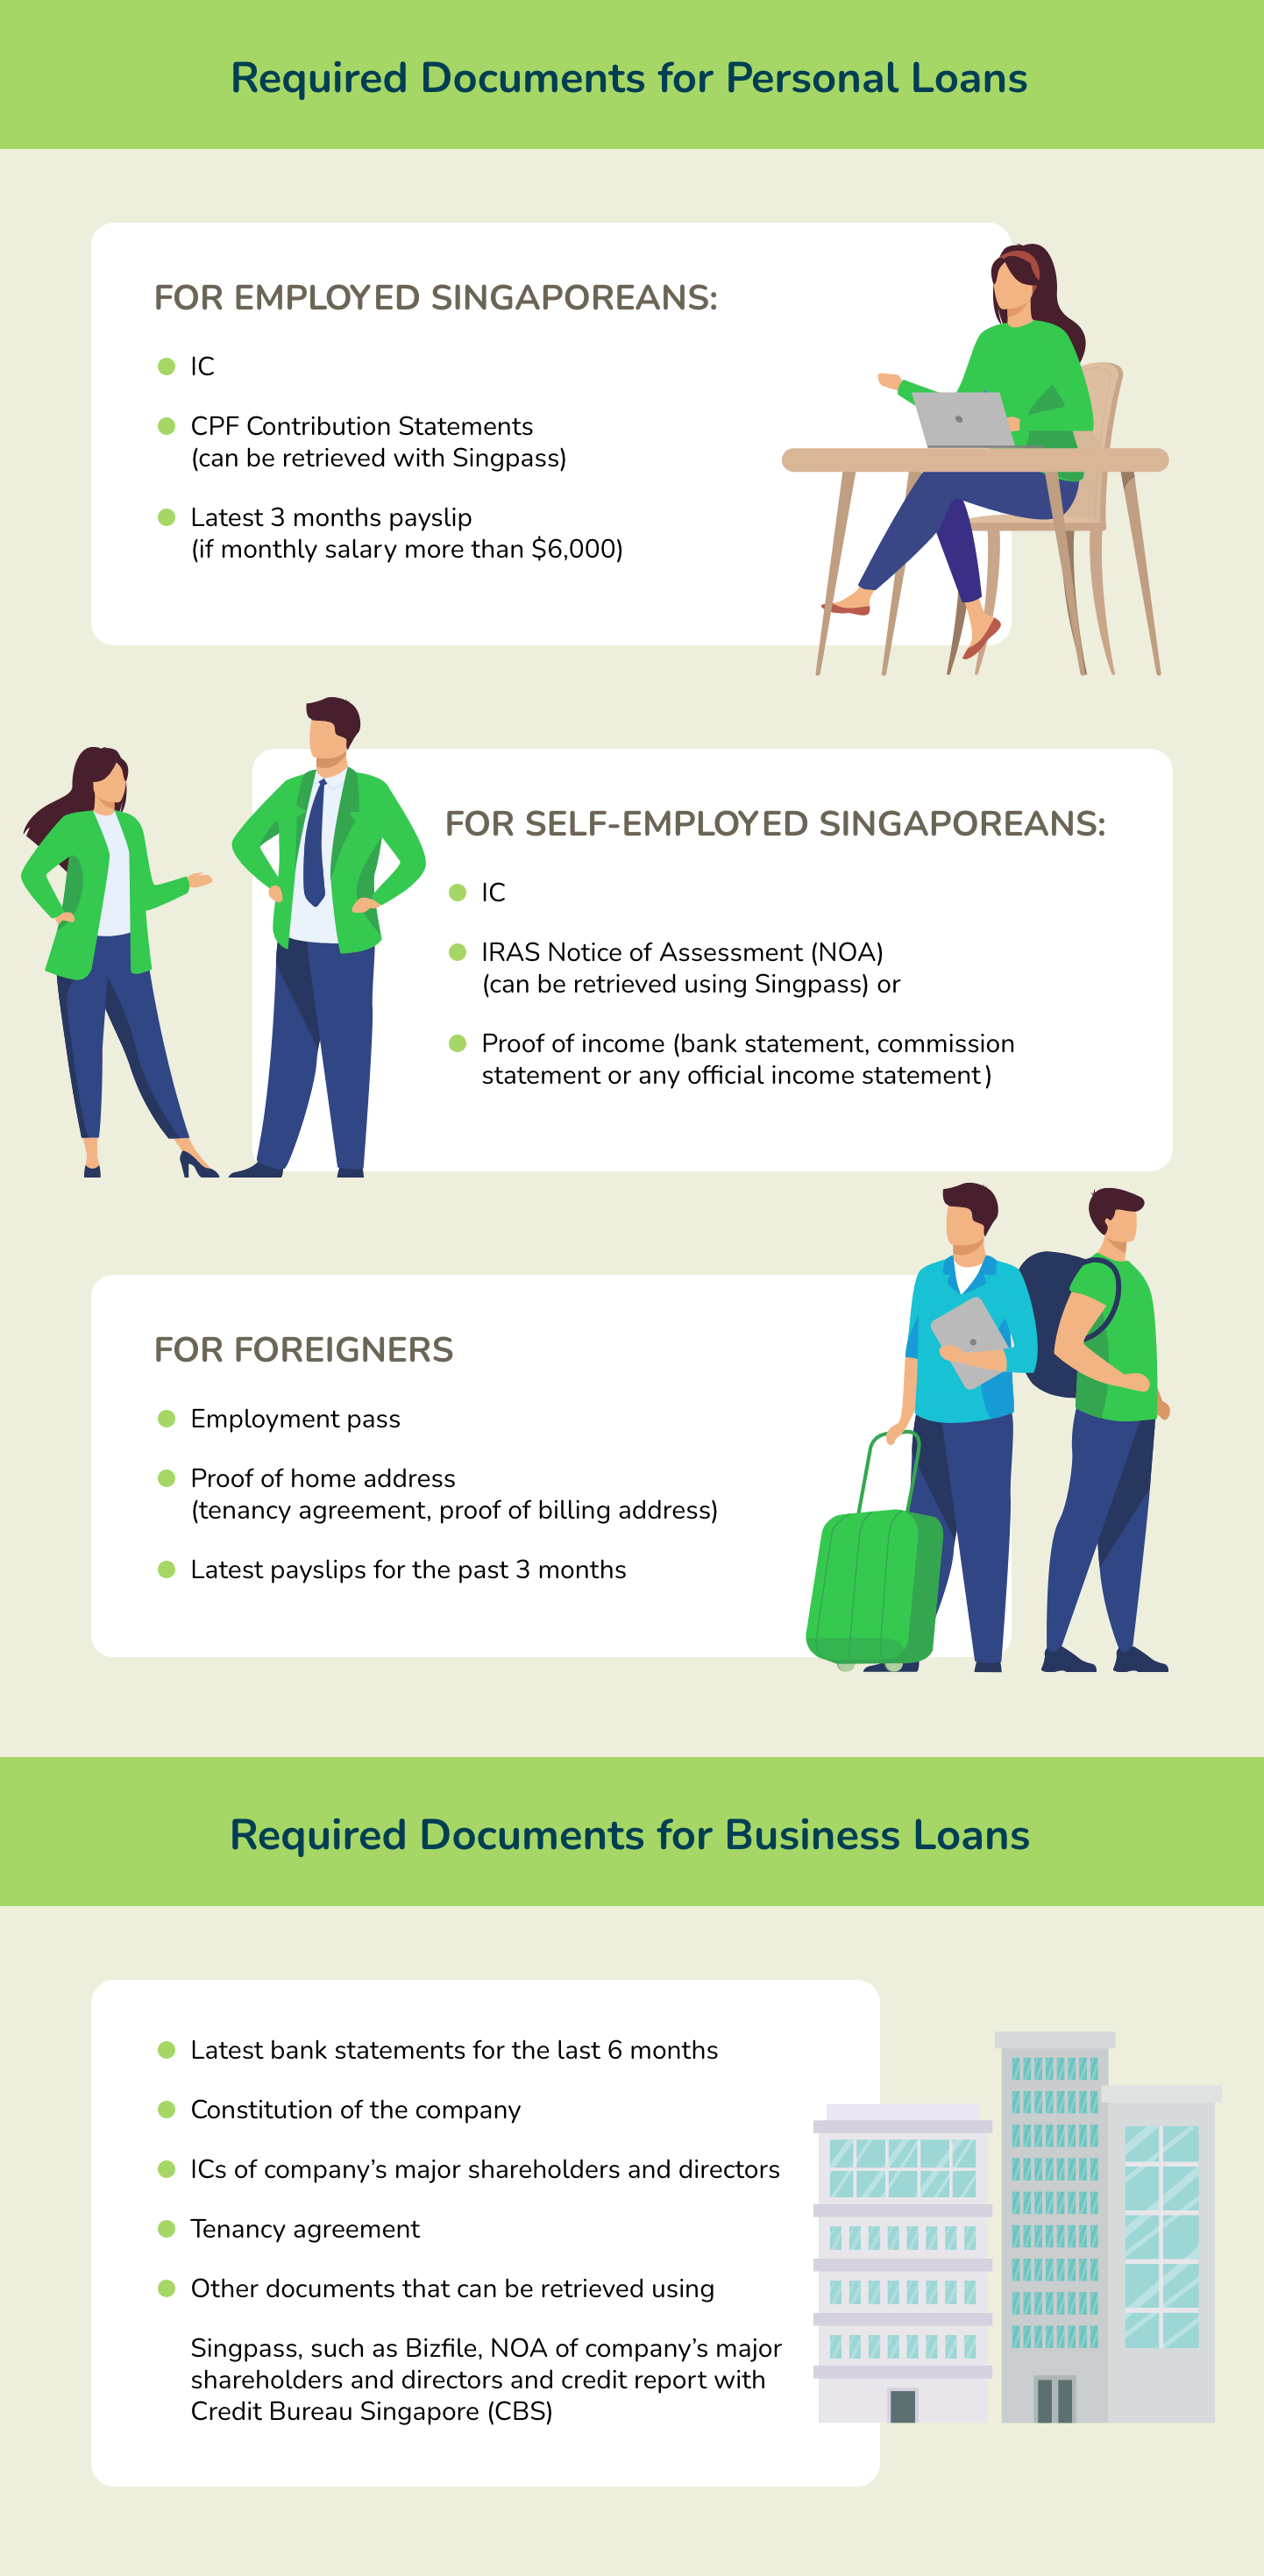 A list of required documents to apply for a loan with licensed money lenders in Singapore